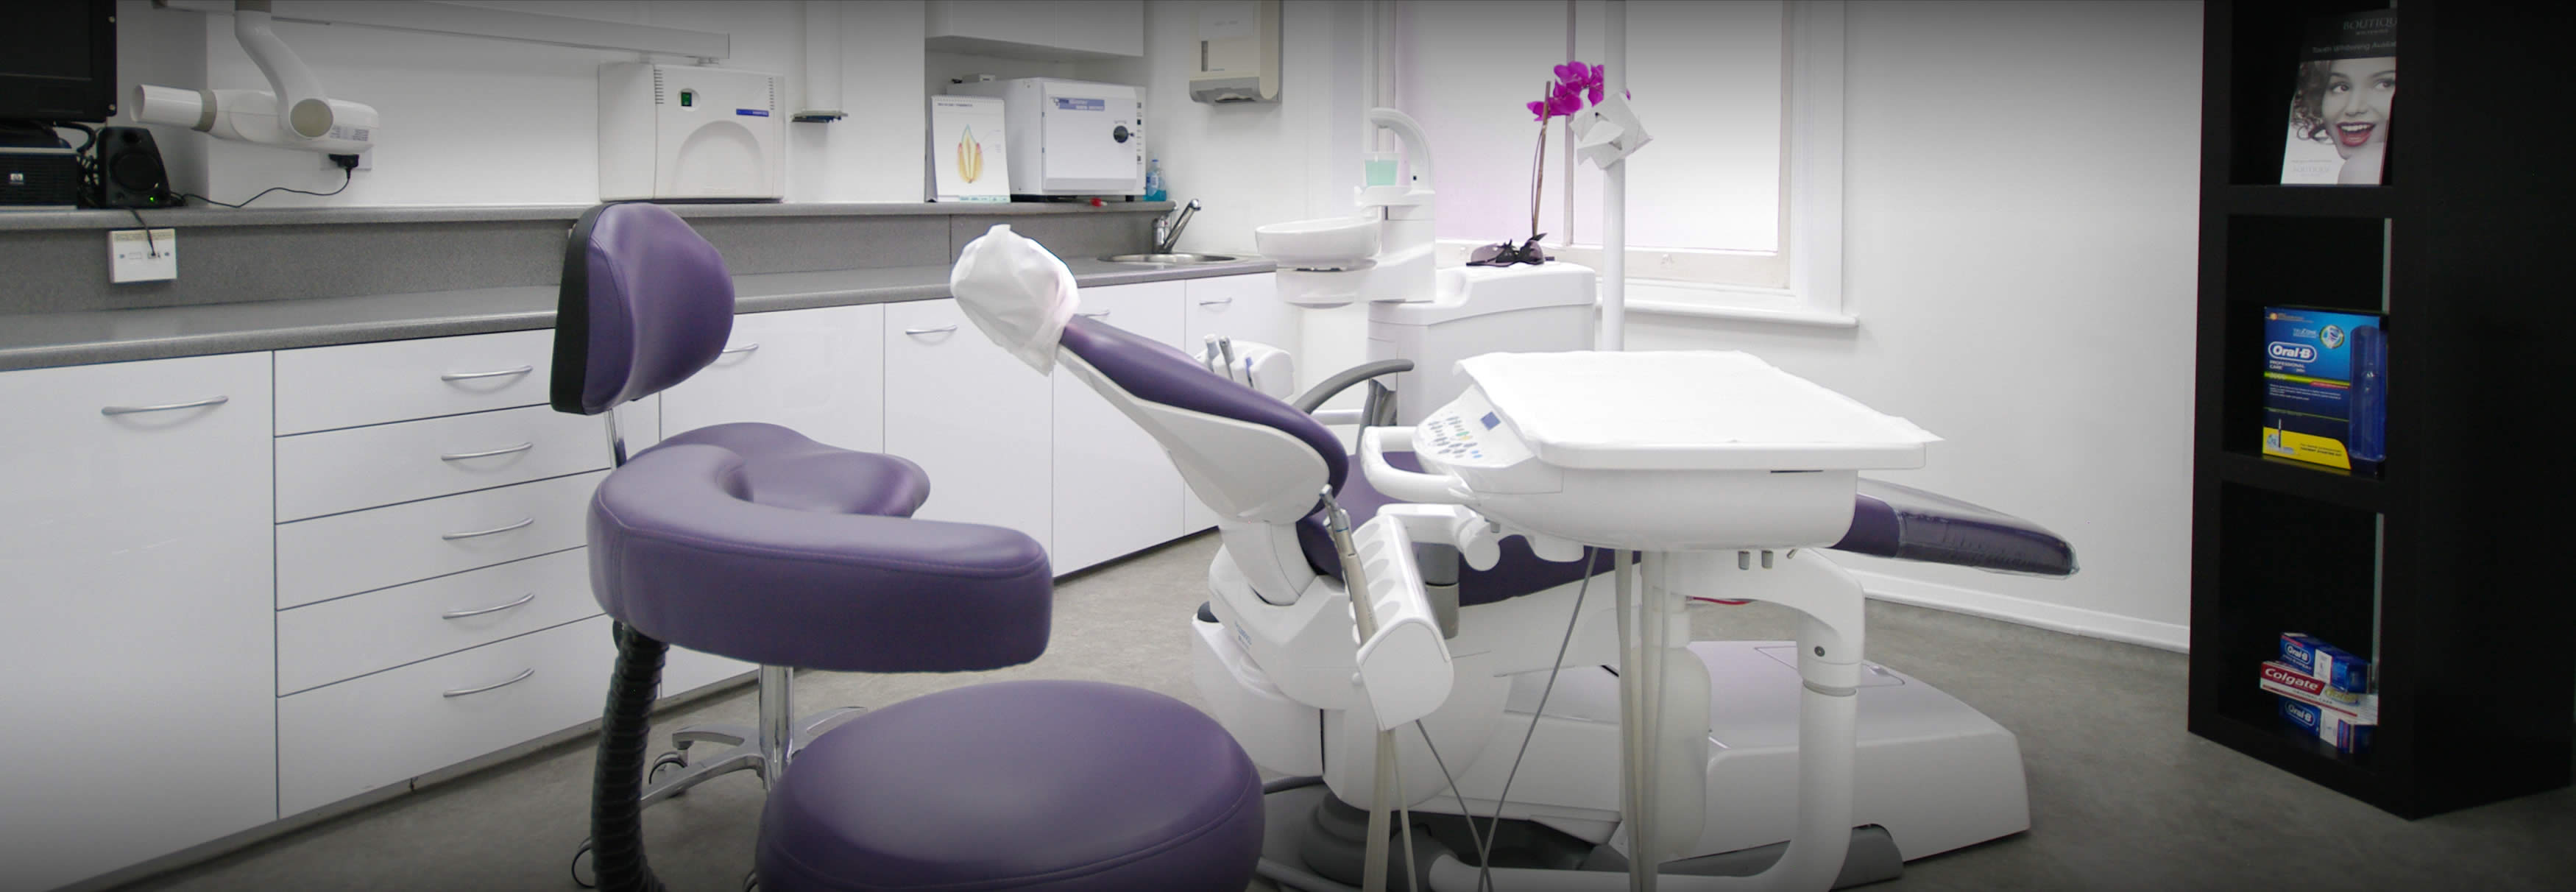 Oral Surgery Referrals at The Dental Gallery in Ealing